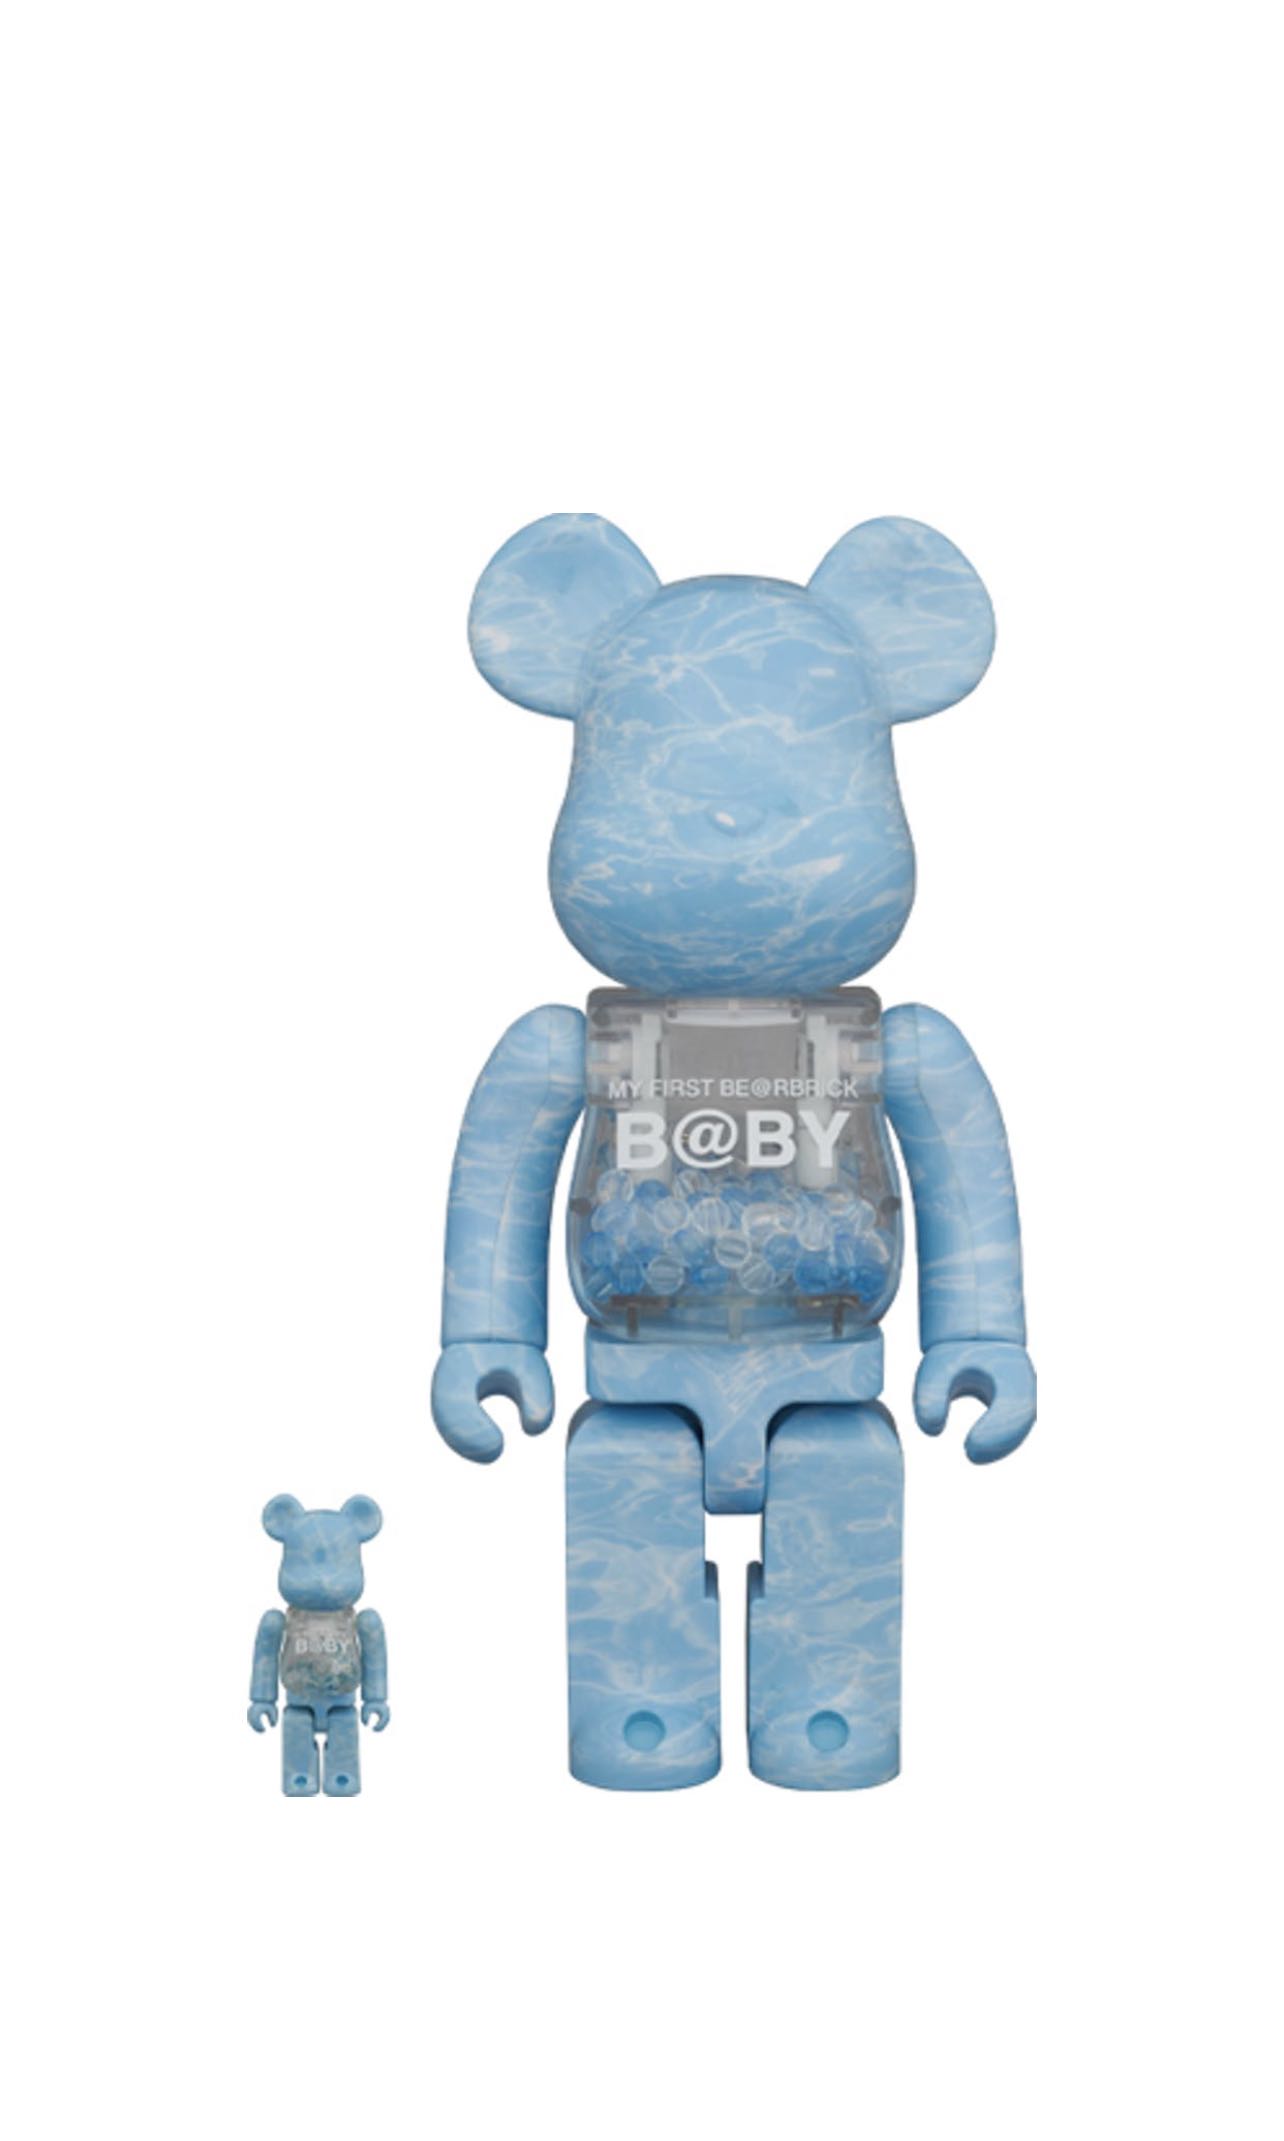 [In Stock] BE@RBRICK x My First Baby Water Crest 400%+100% bearbrick first  b@by 千秋